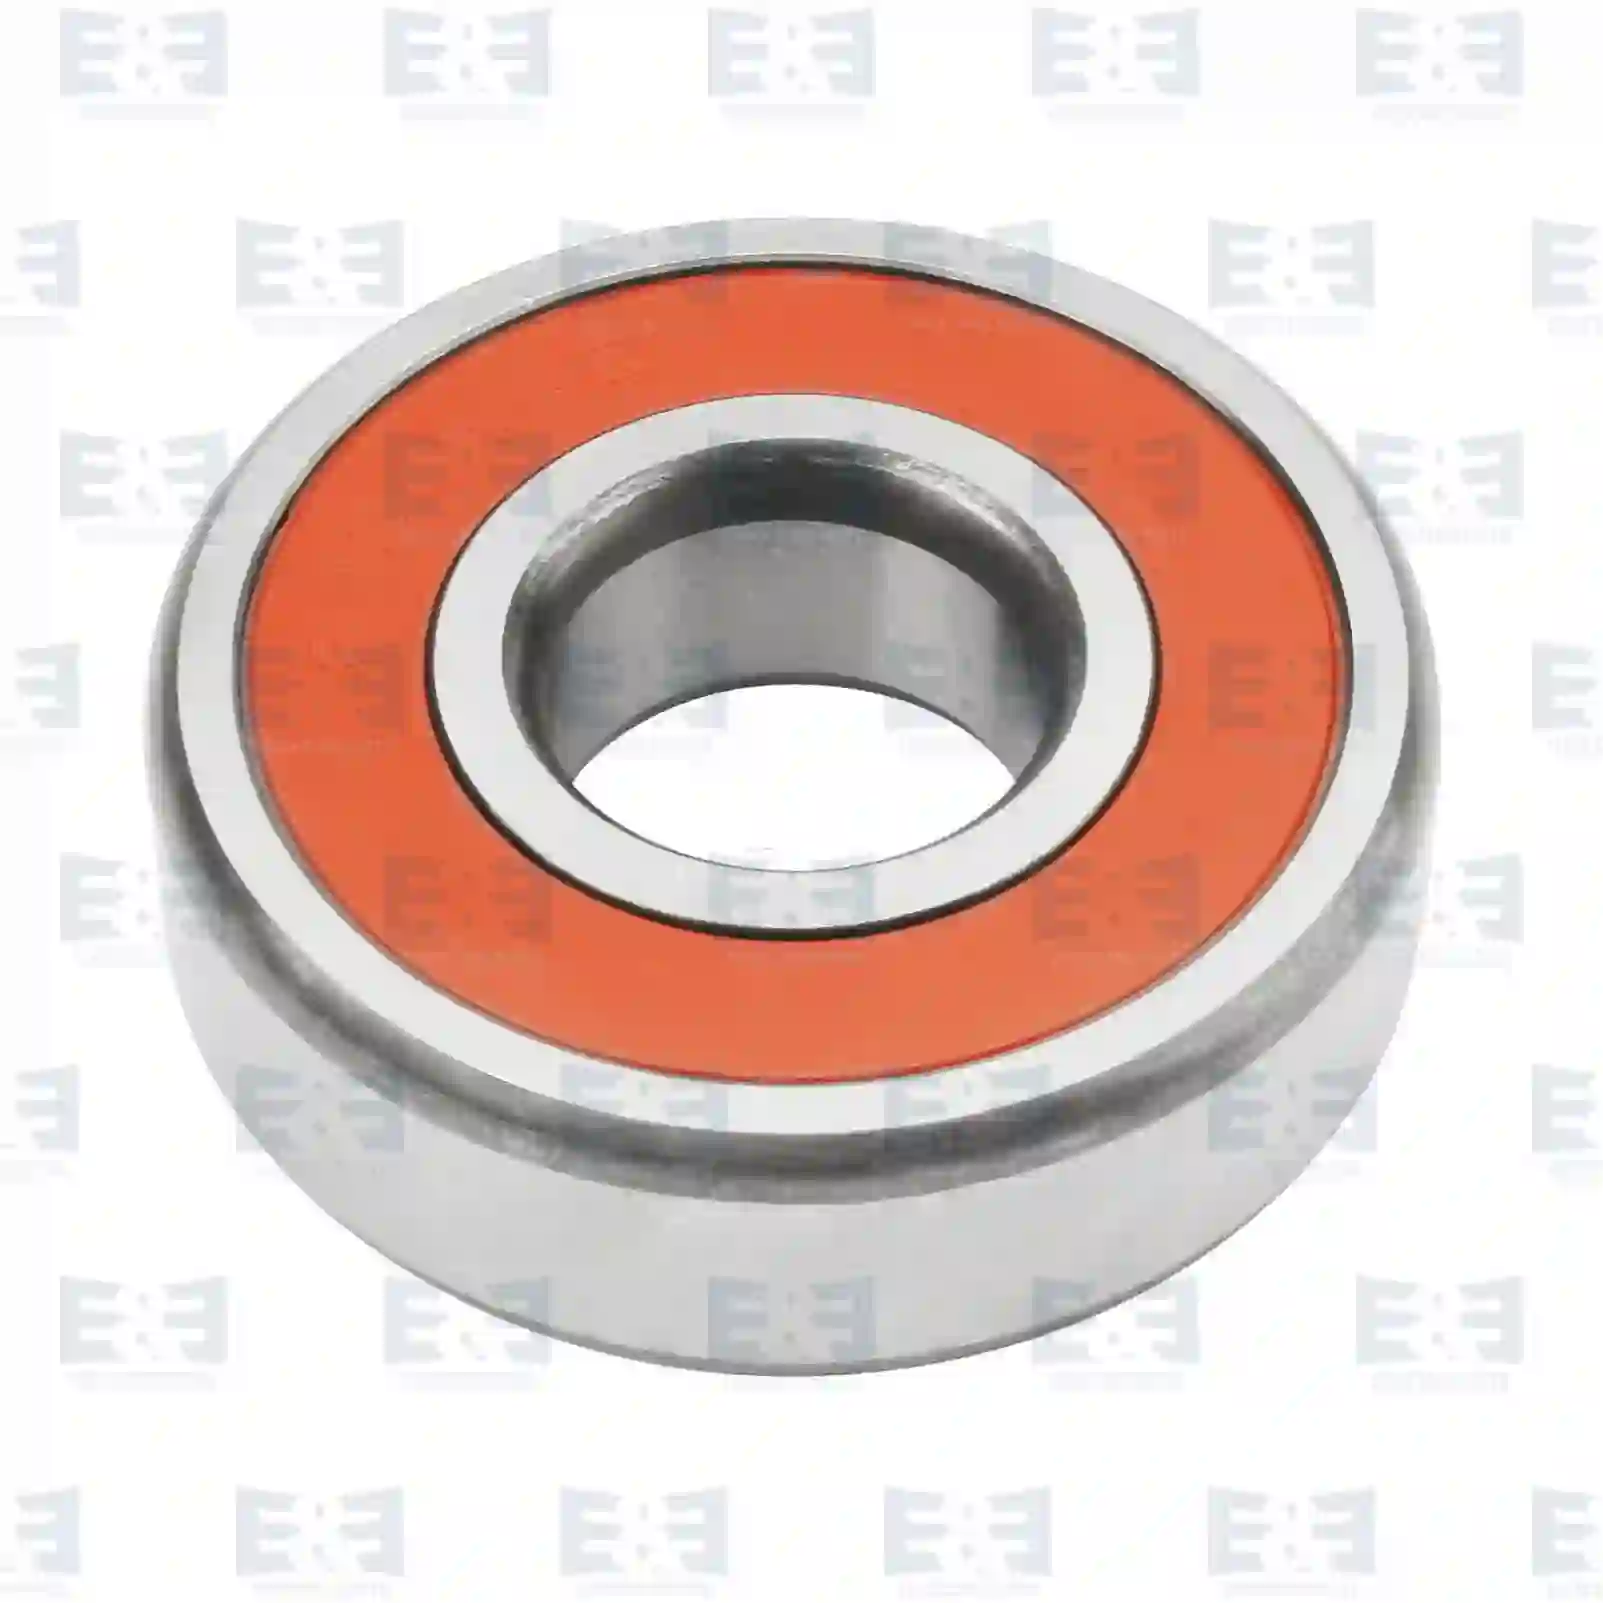 Bearings Ball bearing, EE No 2E2286388 ,  oem no:06314603102, 06314604400, 06314604402, 51934100016, 85900013094, A0023416359, A0770630423, 9069810025, 181876, ZG40196-0008 E&E Truck Spare Parts | Truck Spare Parts, Auotomotive Spare Parts